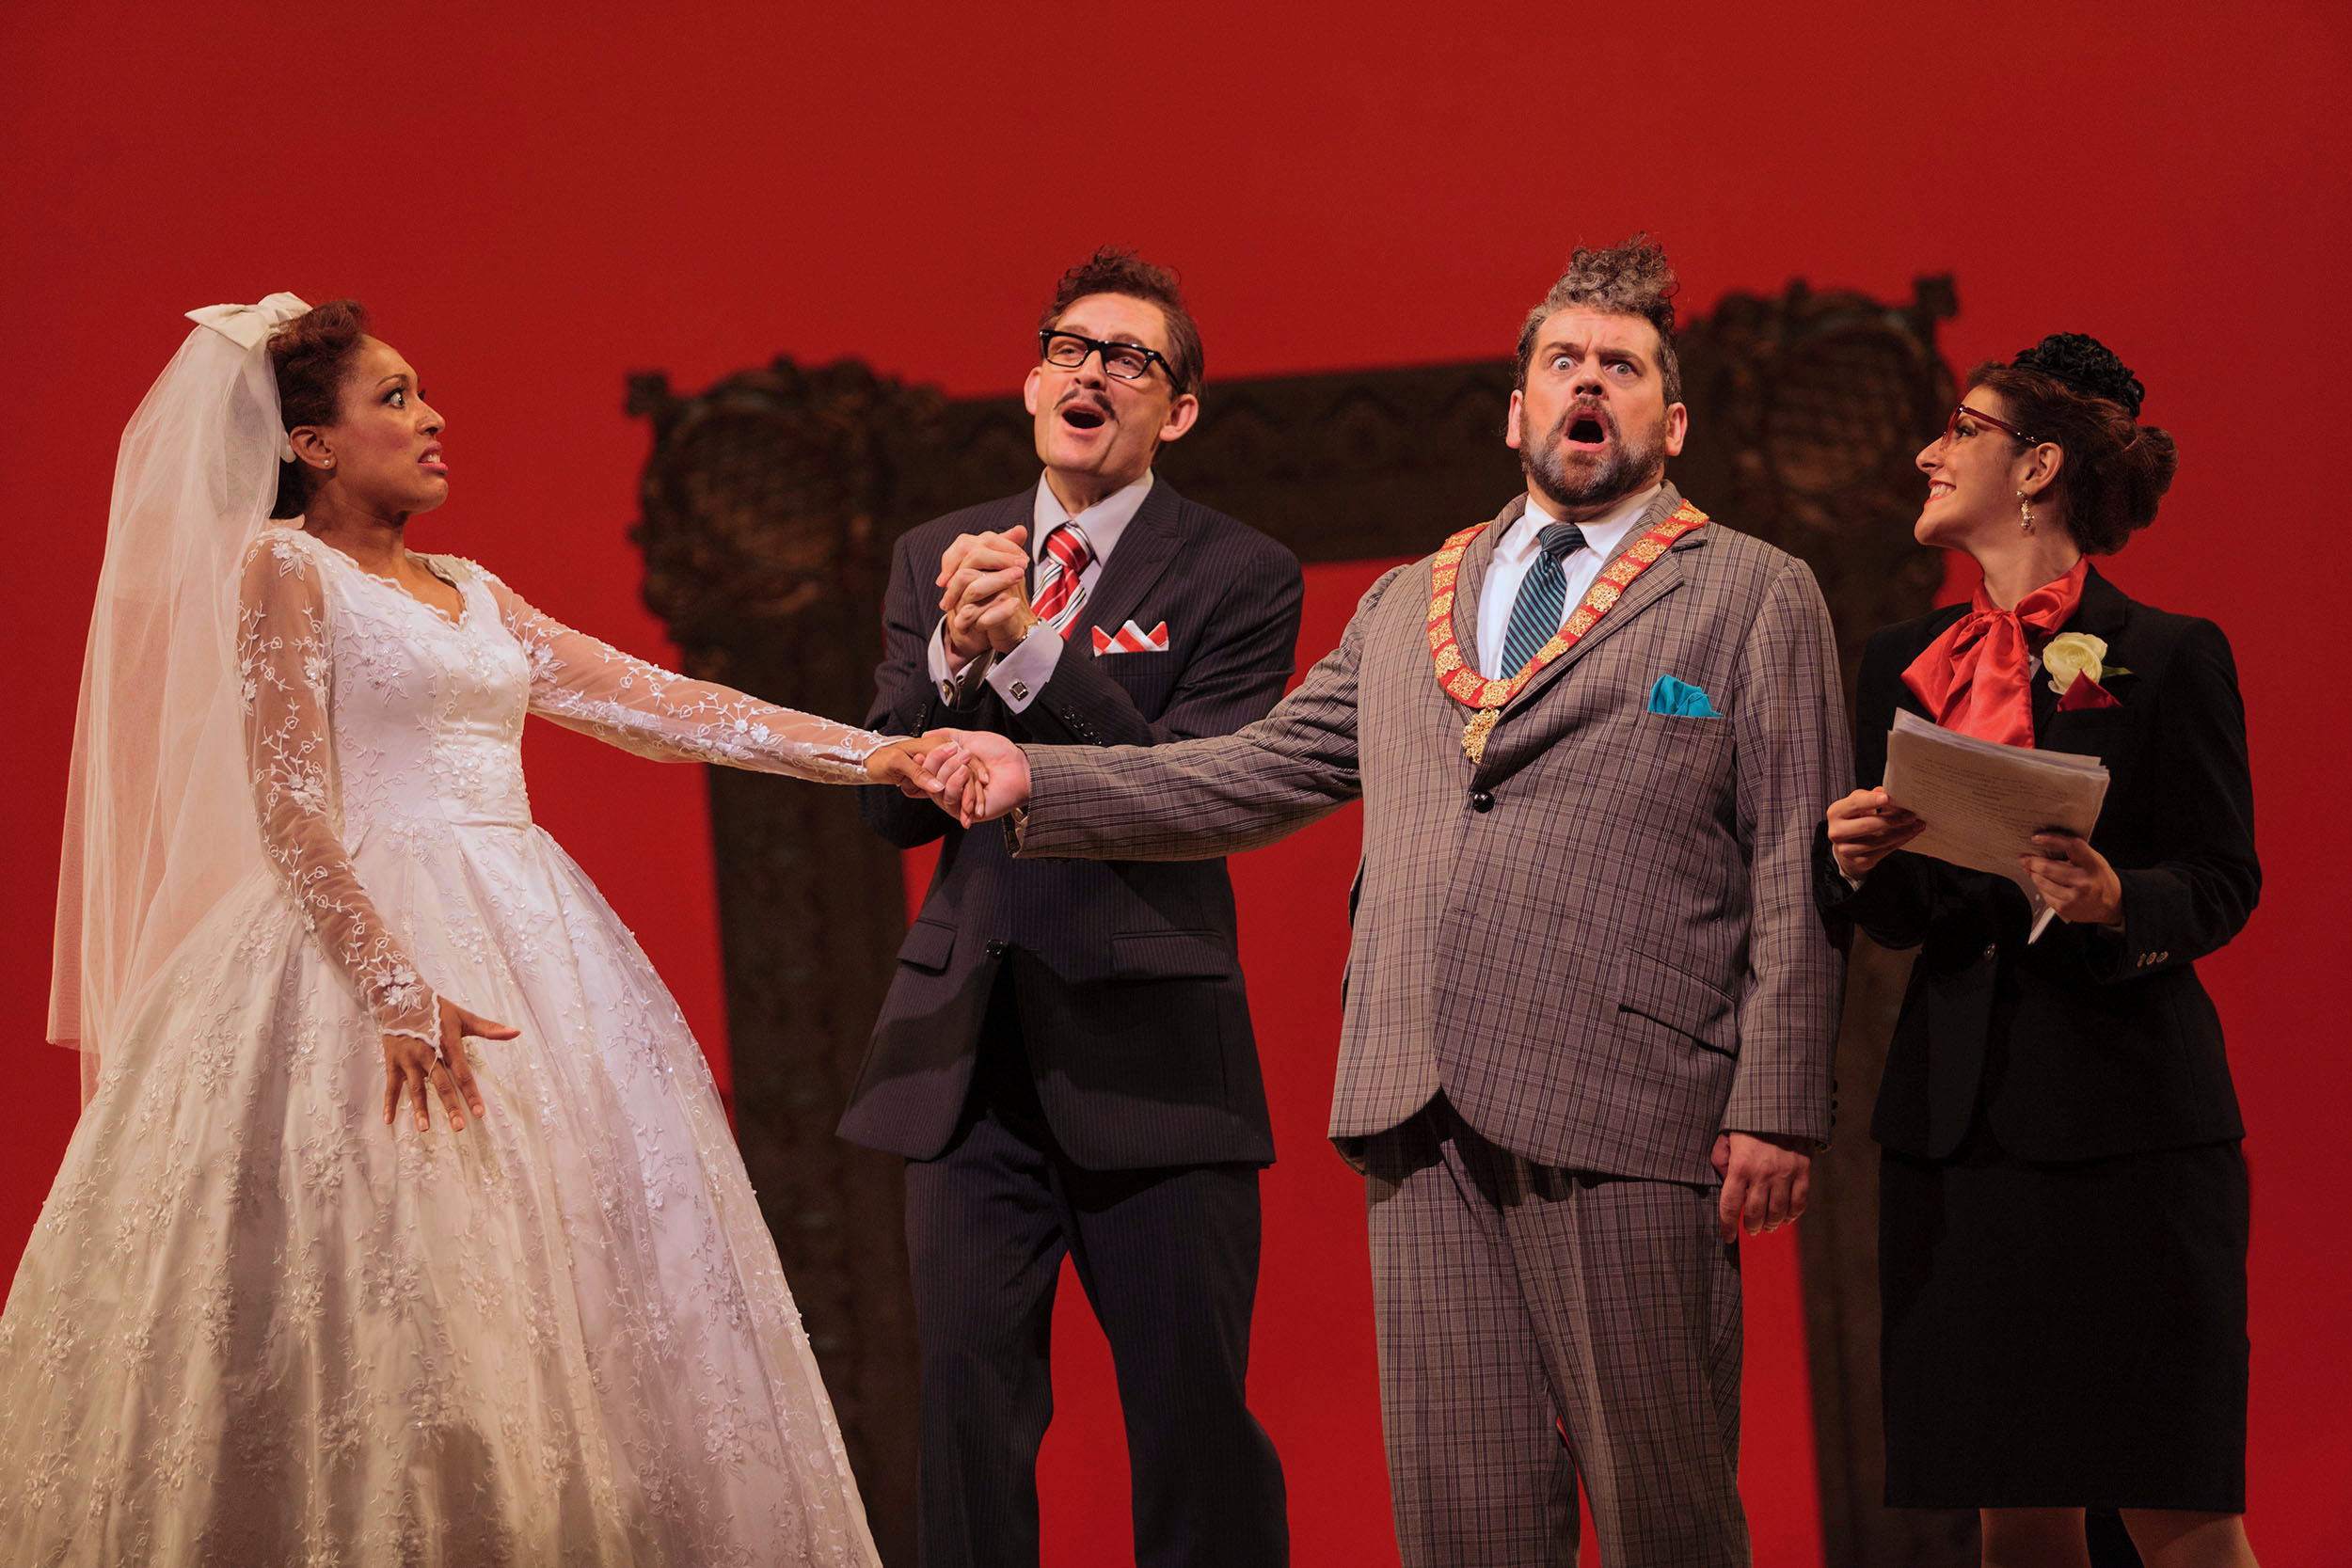  L to R: Jacqueline Echols as Giulietta, Jason Hardy as Baron Kelbar, Andrew Wilkowske as La Rocca and ensemble member Sharin Apostolou in The Glimmerglass Festival's 2013 production of Verdi's  King for a Day.  